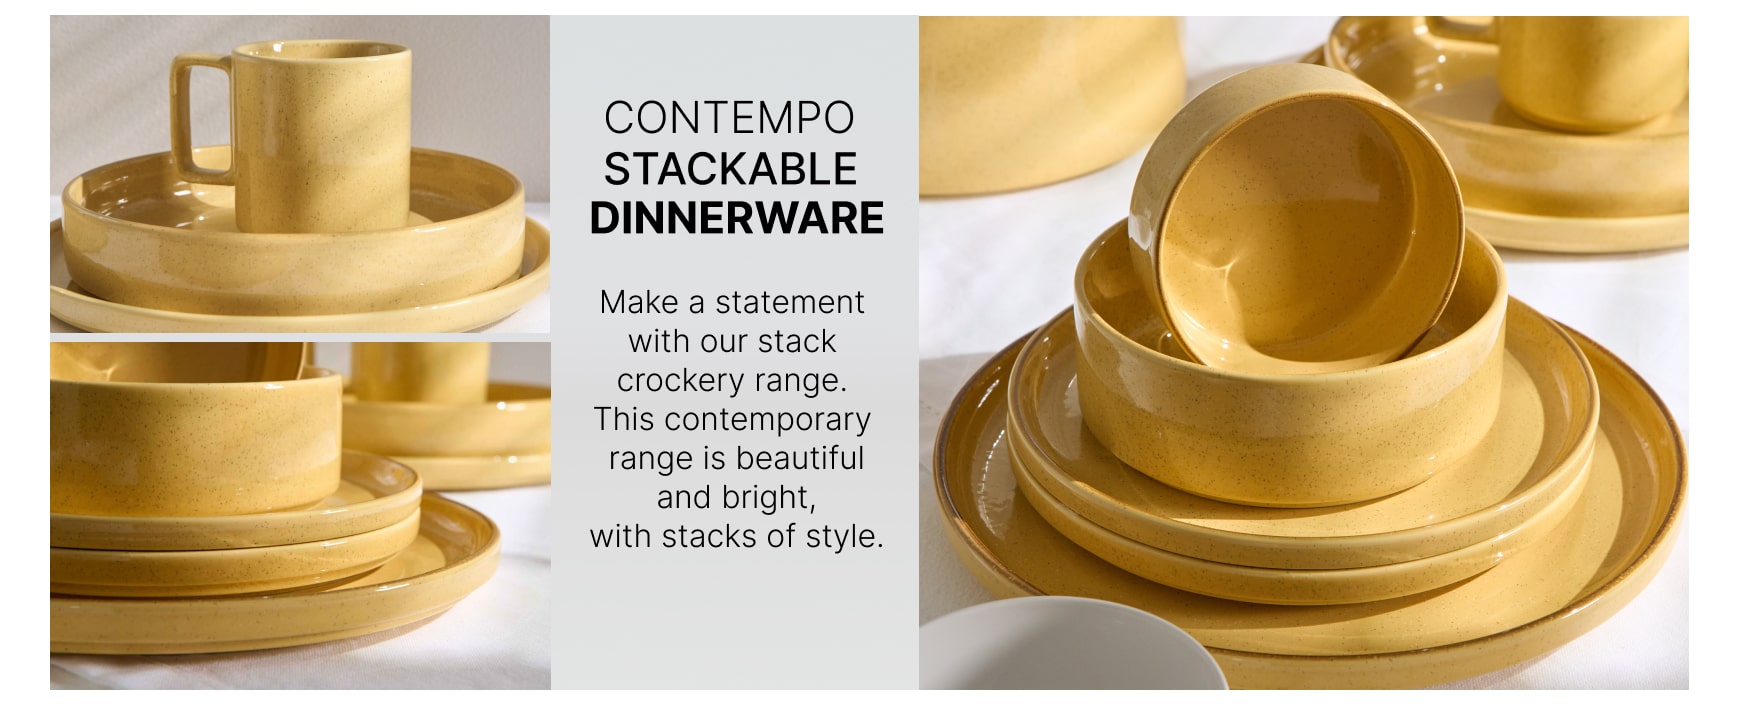 This contemporary range is beautiful and bright with stacks of style. Shop premium range